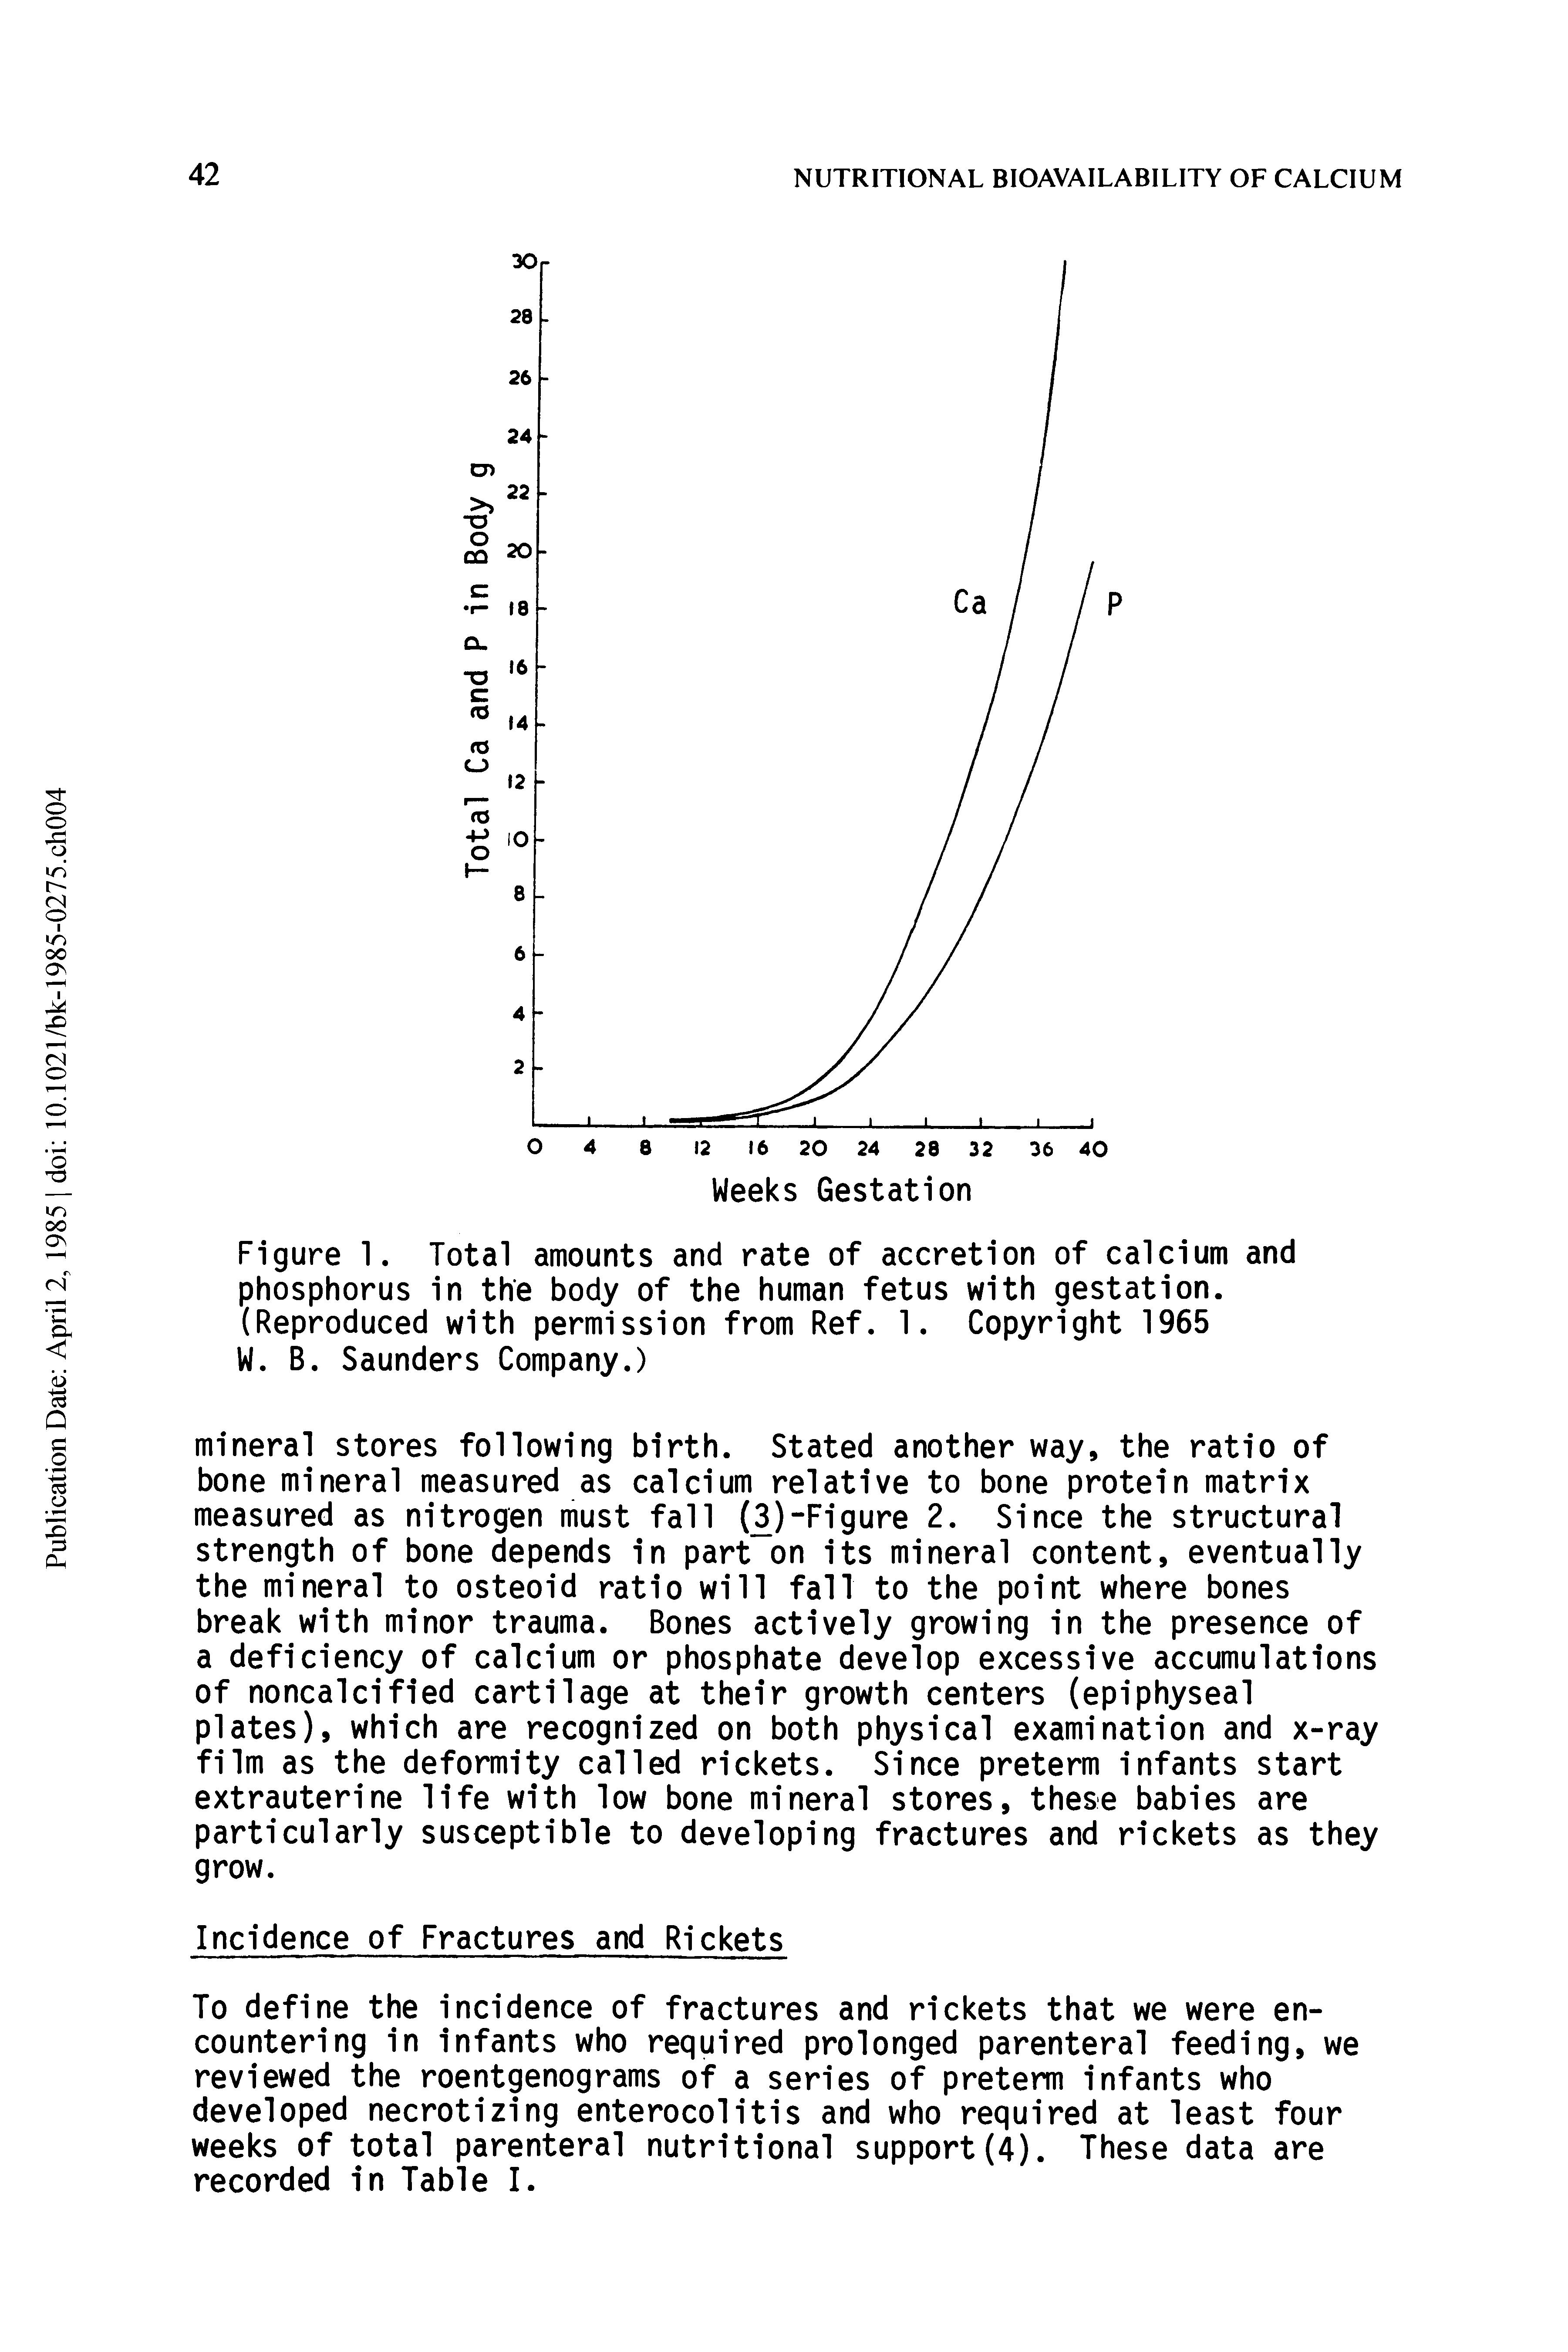 Figure 1. Total amounts and rate of accretion of calcium and phosphorus in the body of the human fetus with gestation. (Reproduced with permission from Ref. 1. Copyright 1965 W. B. Saunders Company.)...